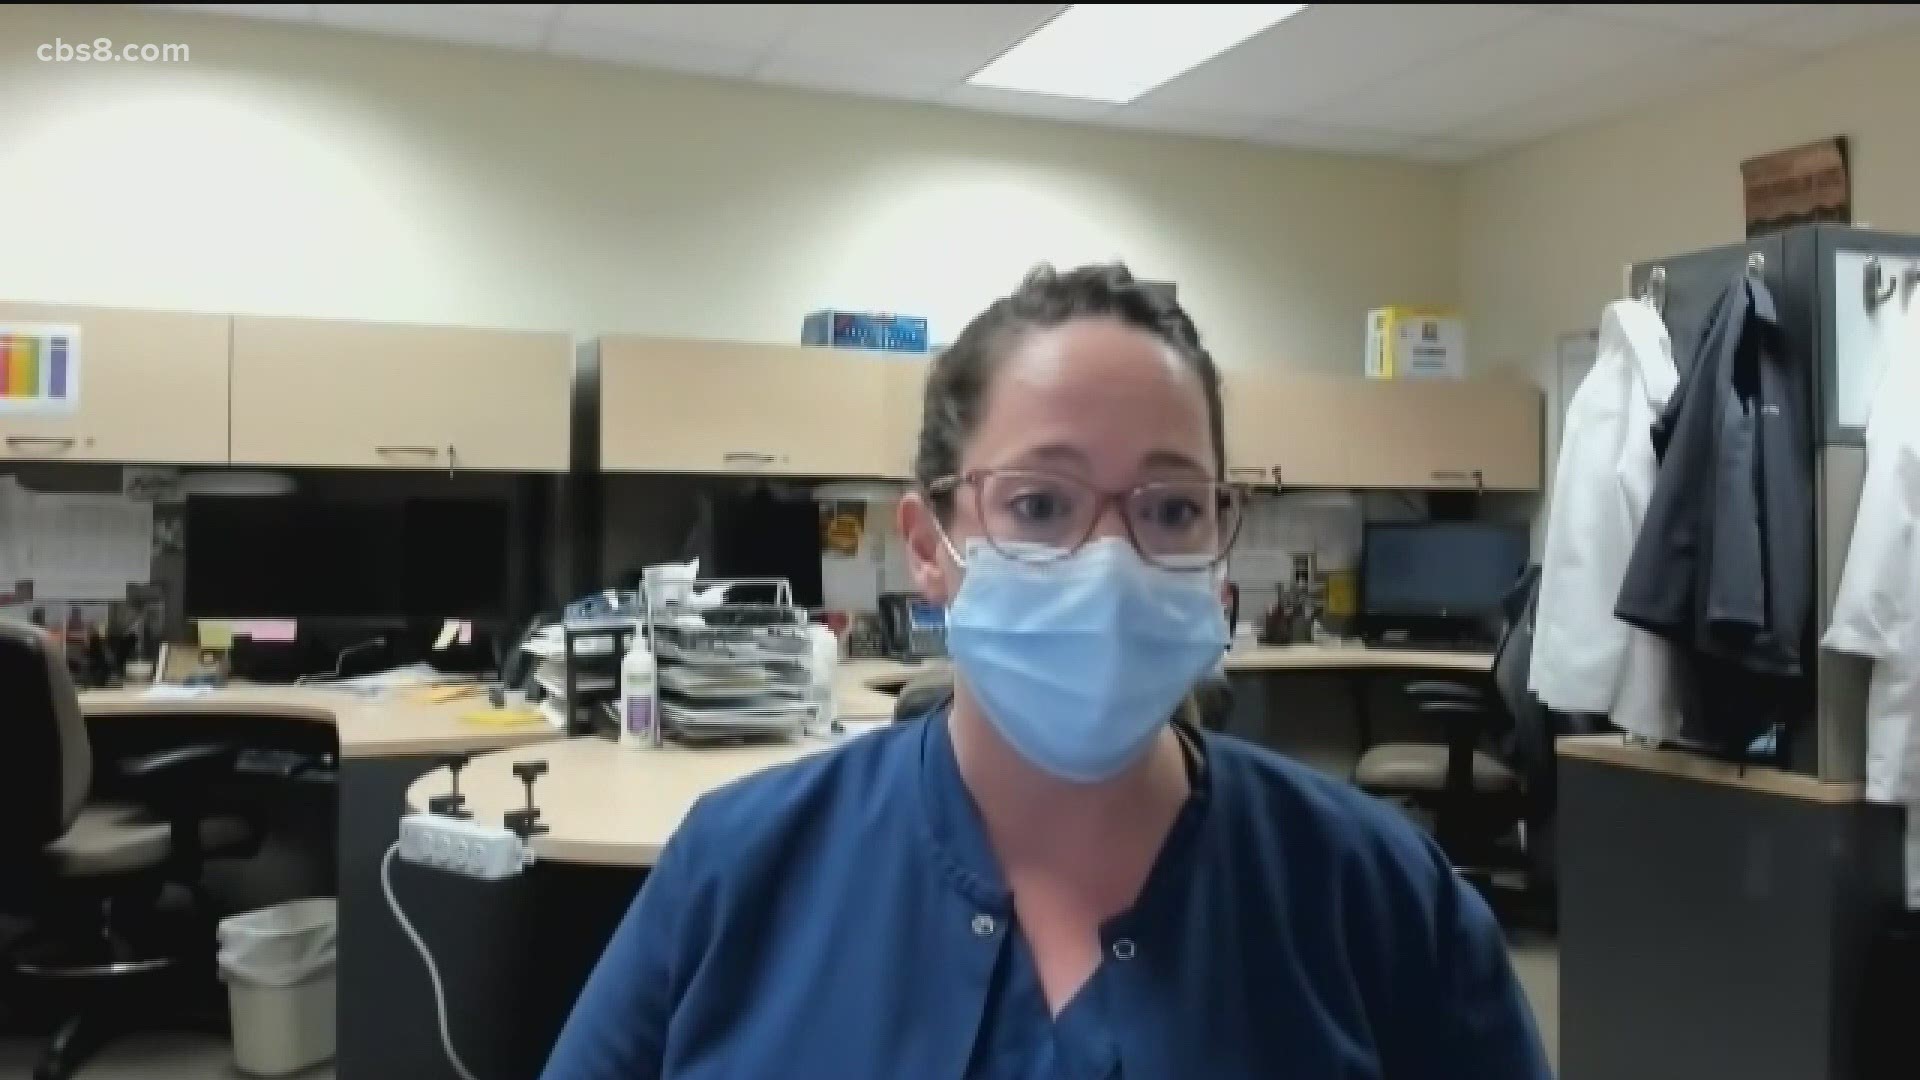 Nurses working long shifts with sick patients have a message for the community not taking the virus seriously.